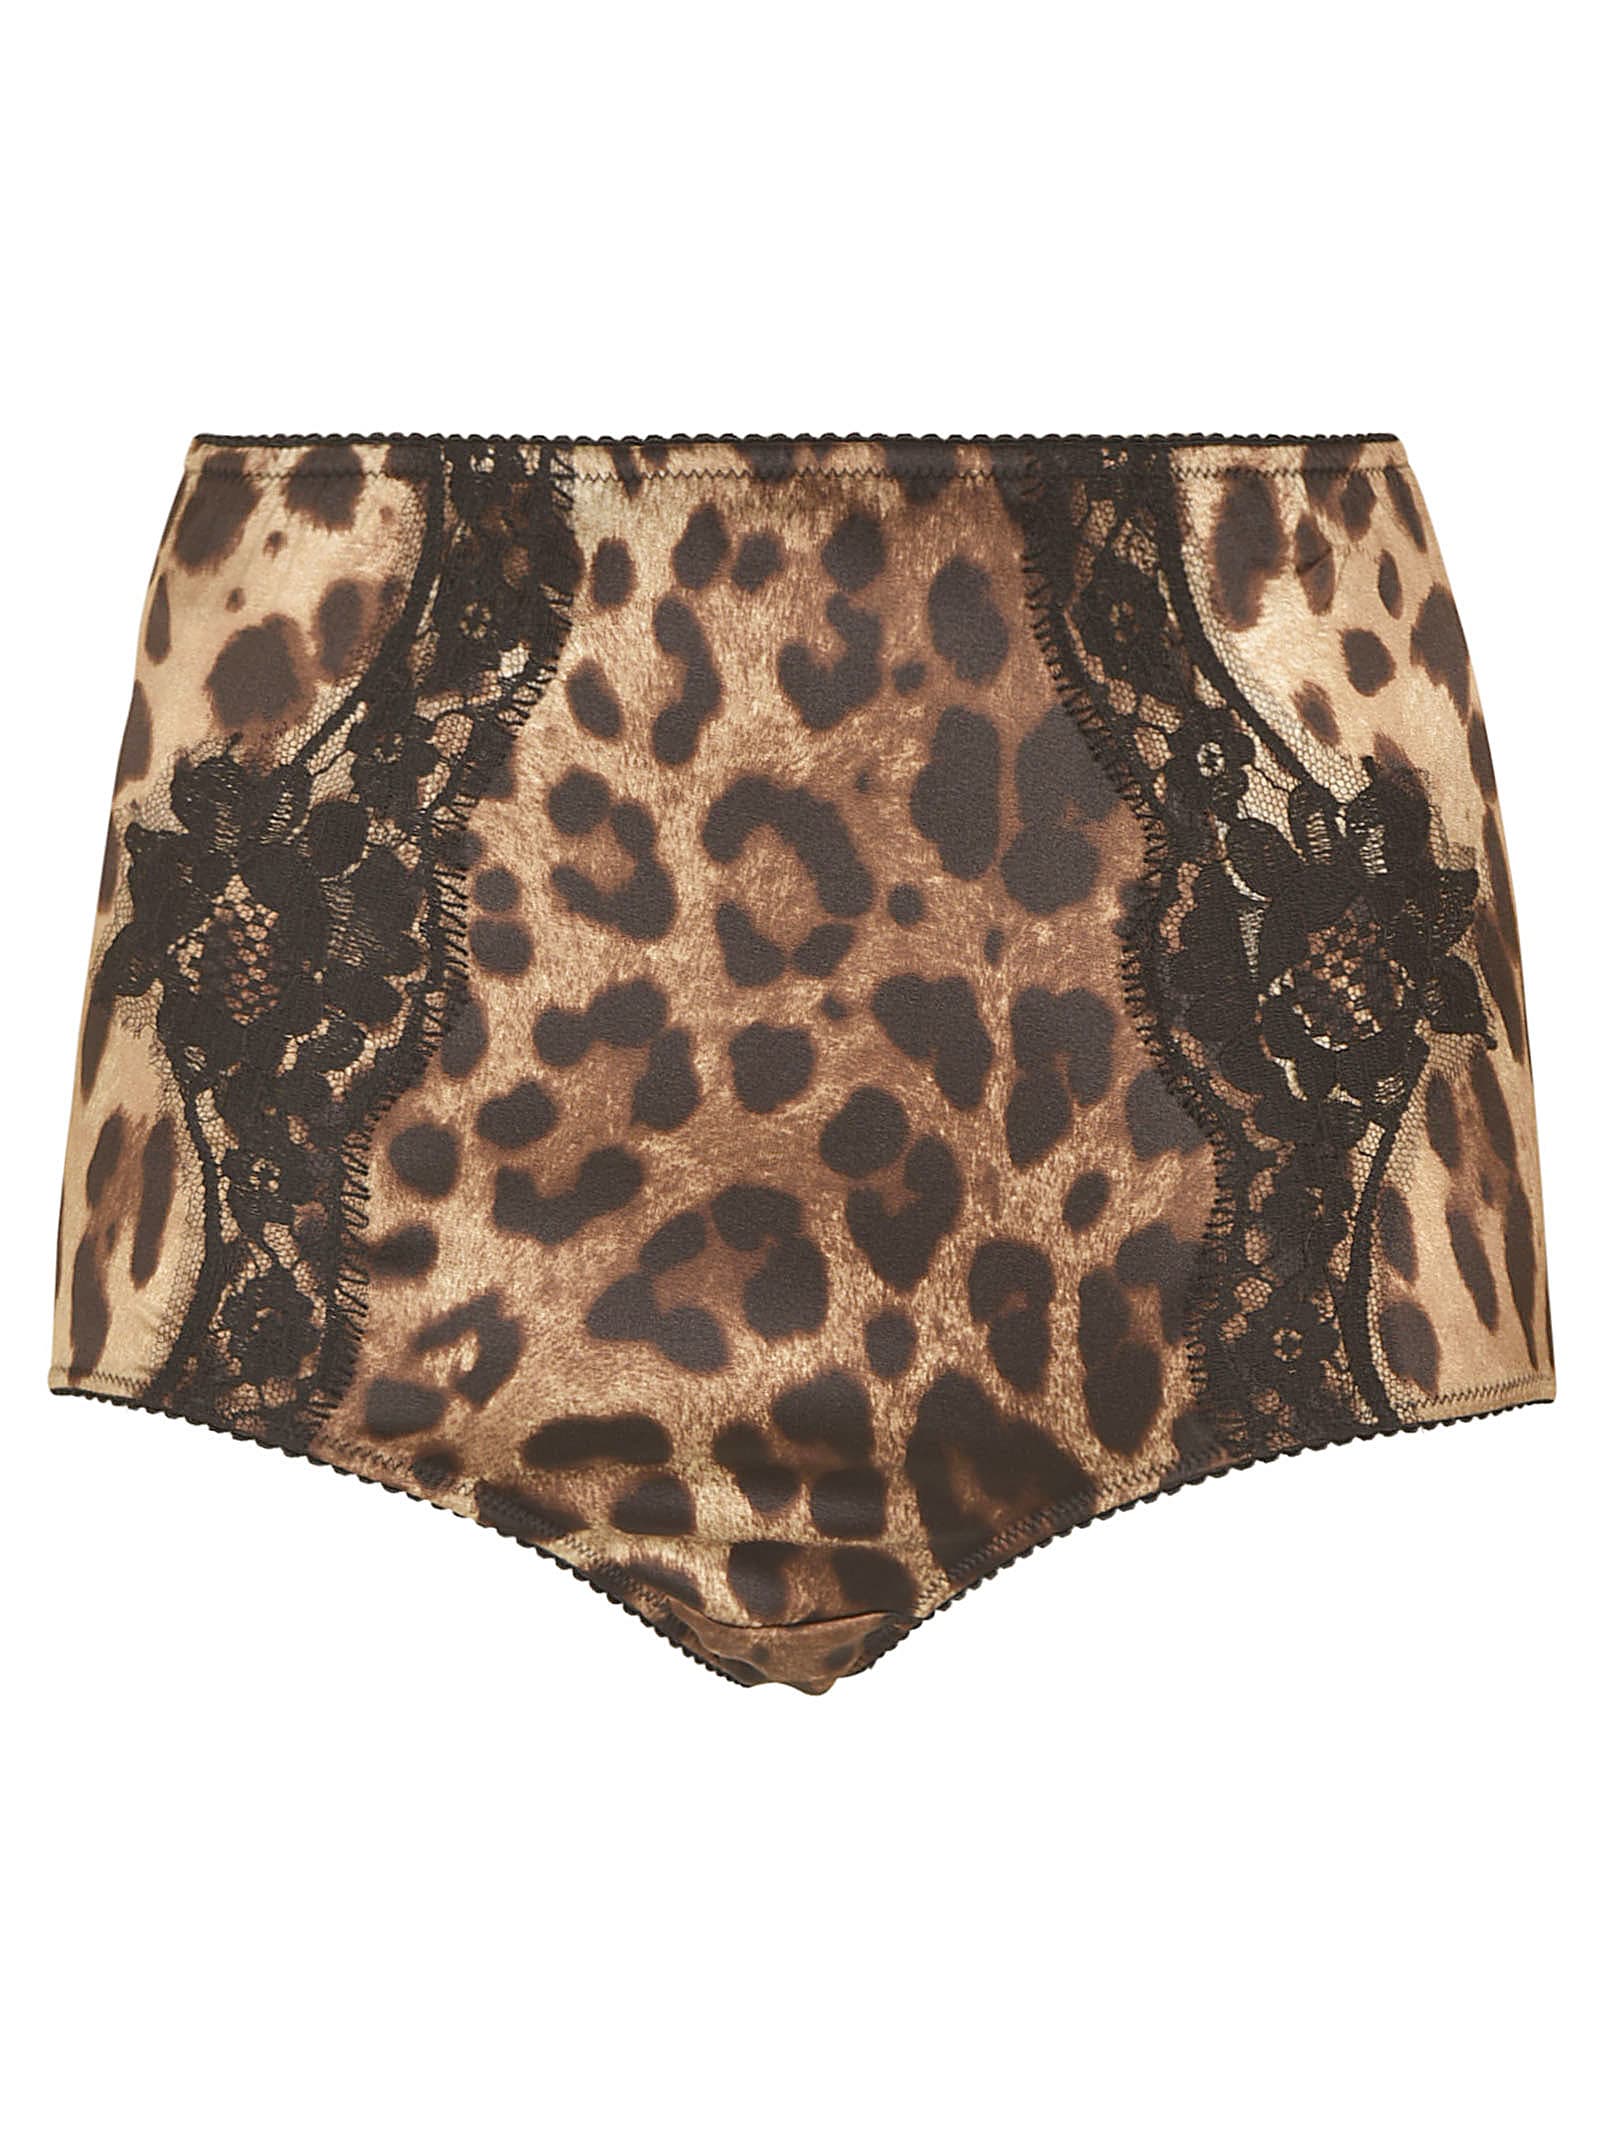 Dolce & Gabbana Floral Embroidered Animalier Print Panties